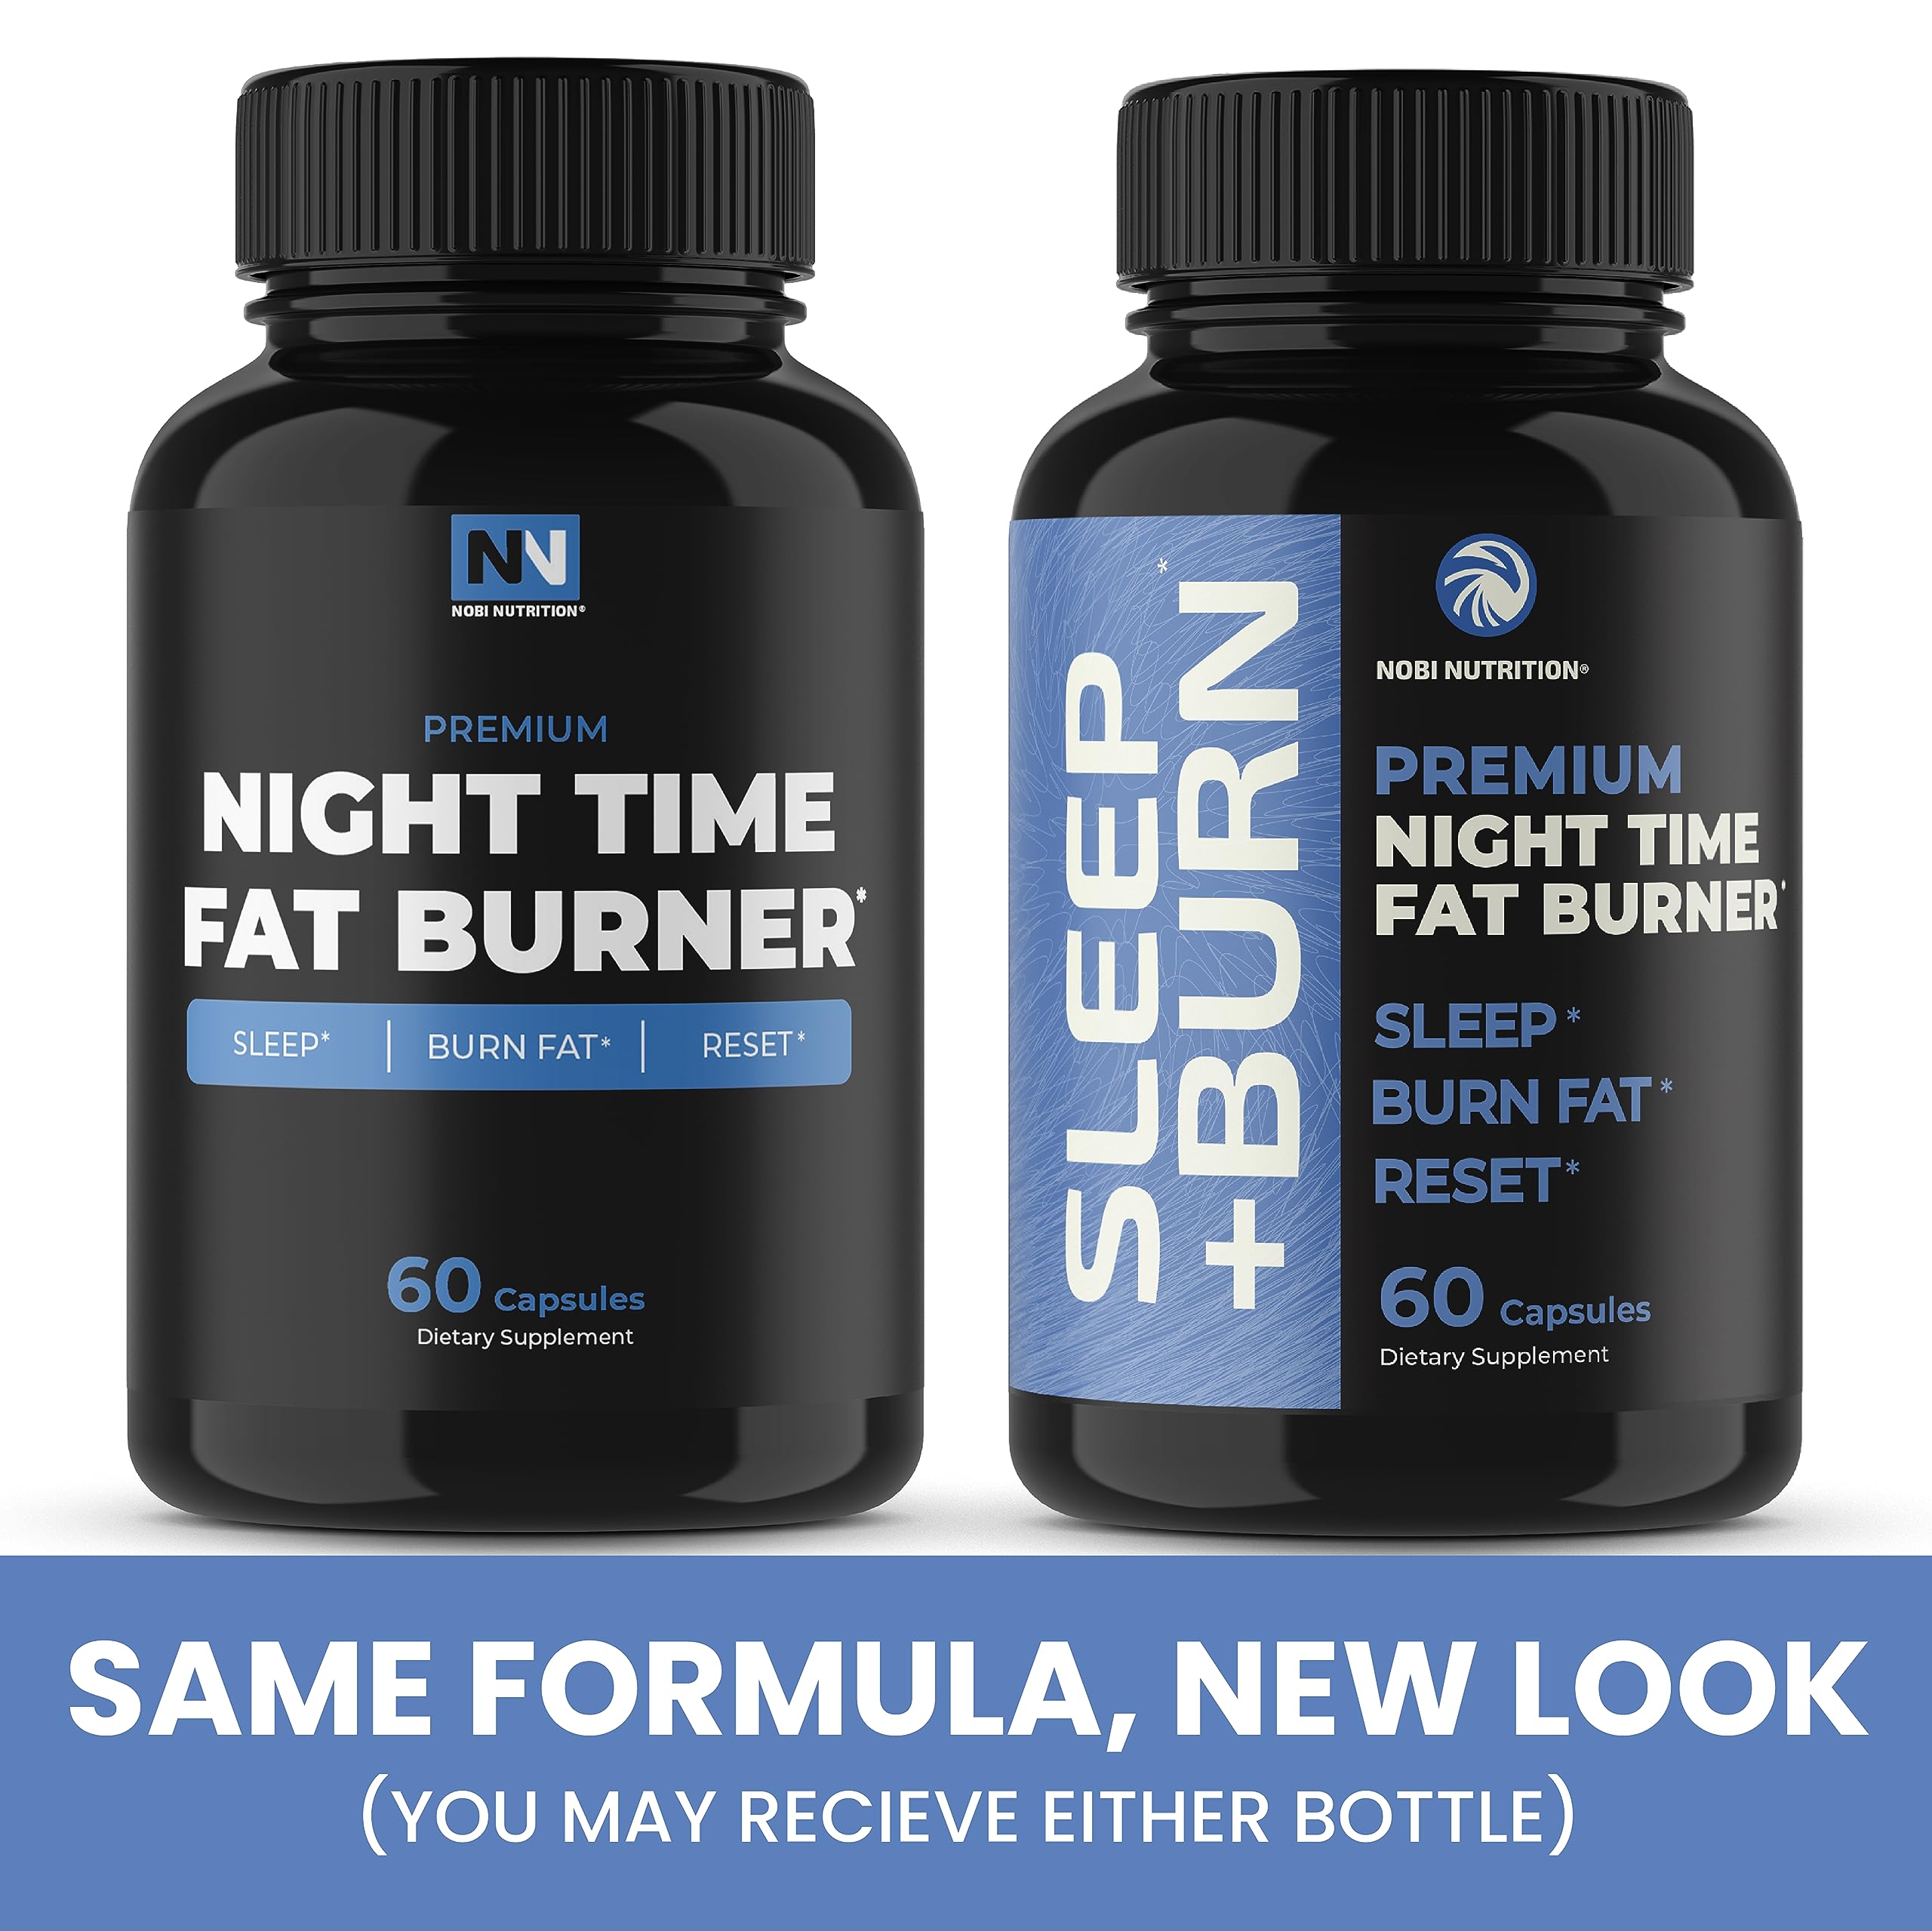 Night Time Fat Burner | Shred Fat While You Sleep | Hunger Suppressant, Carb Blocker & Weight Loss Support Supplements | Burn Belly Fat, Support Metabolism & Fall Asleep Fast | 60 Nighttime Pills